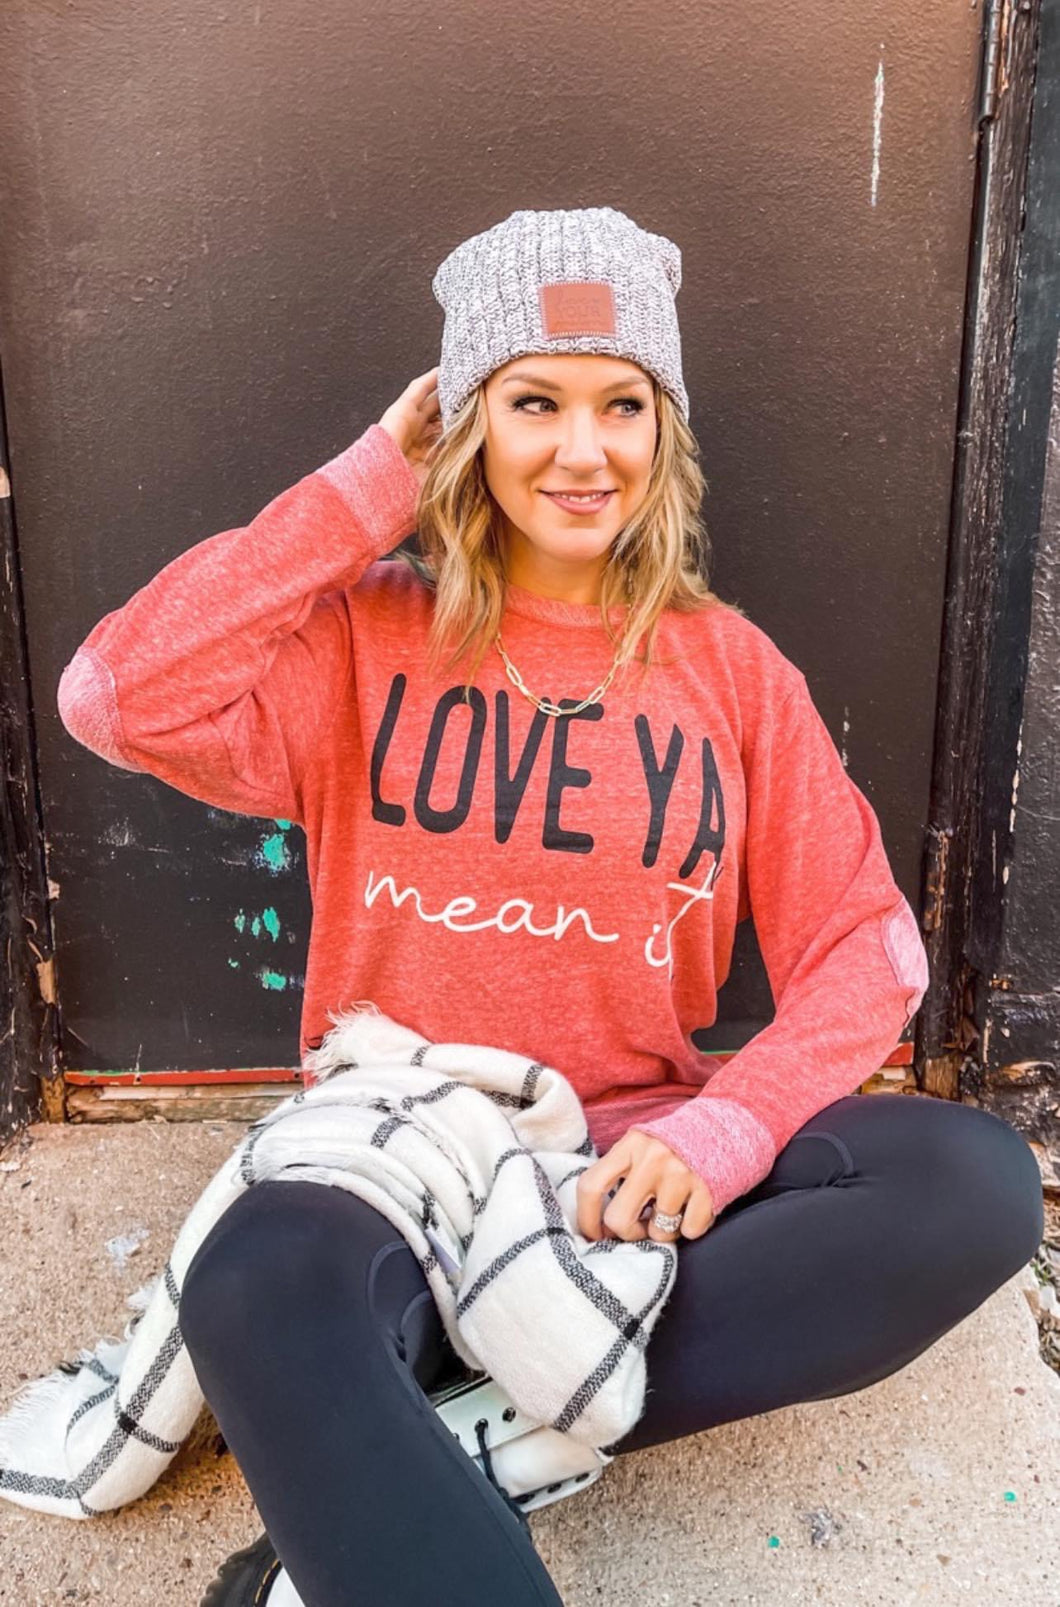 “Love ya Mean it” Adult & Youth Top